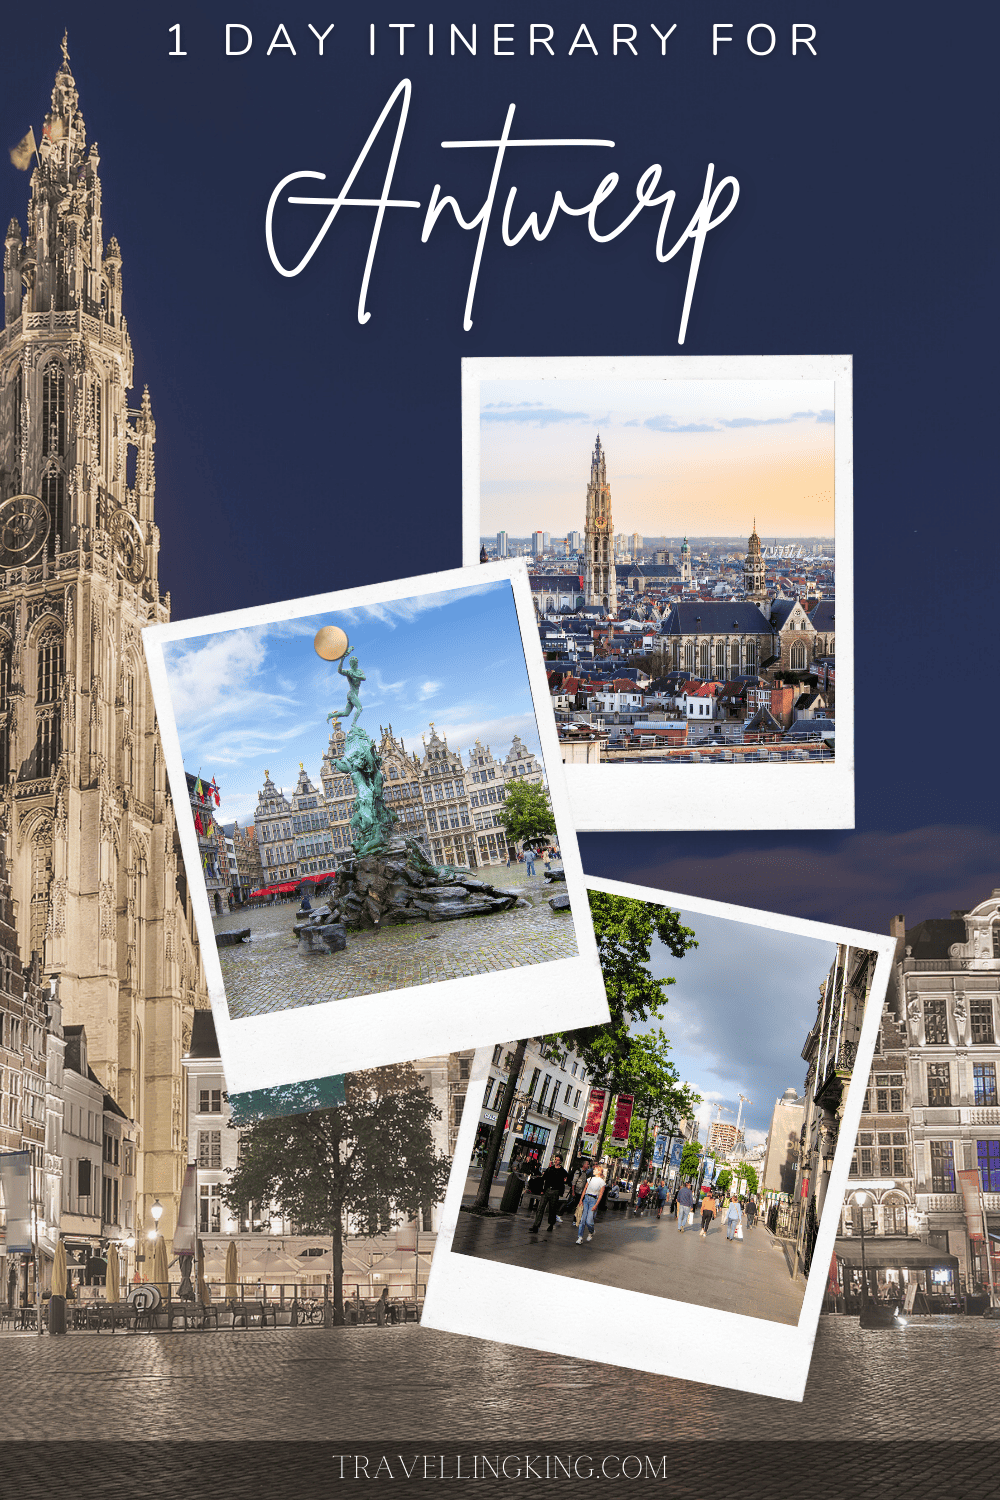 1 Day Itinerary for Antwerp